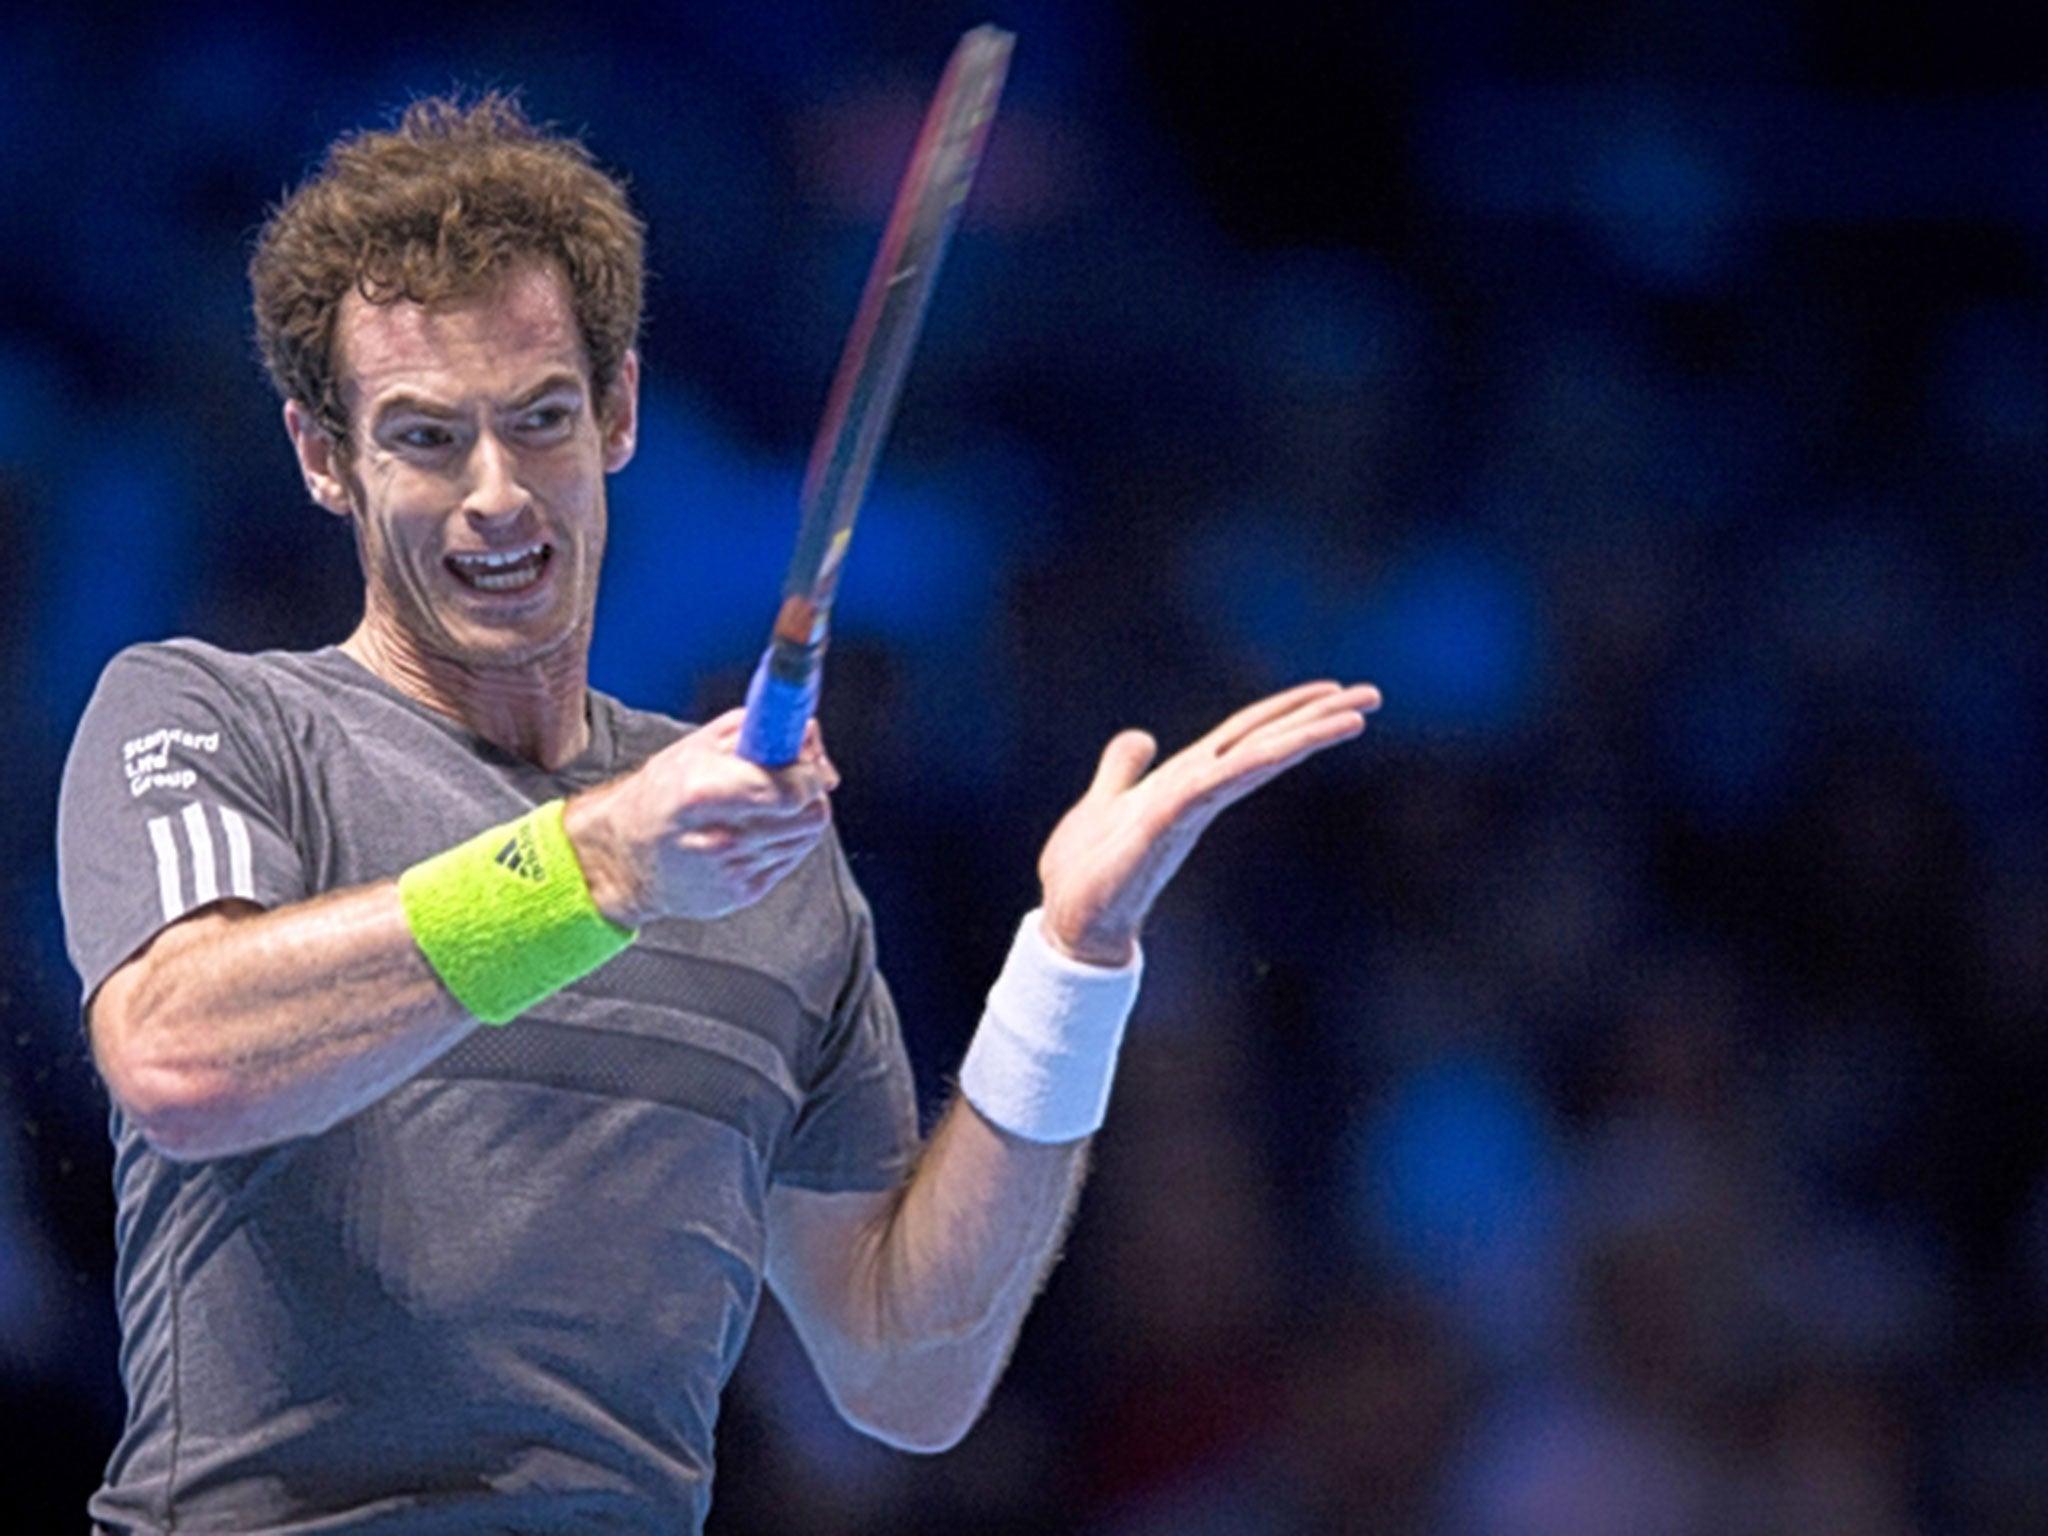 Hitting back: Murray has high hopes of returning to peak form in 2015